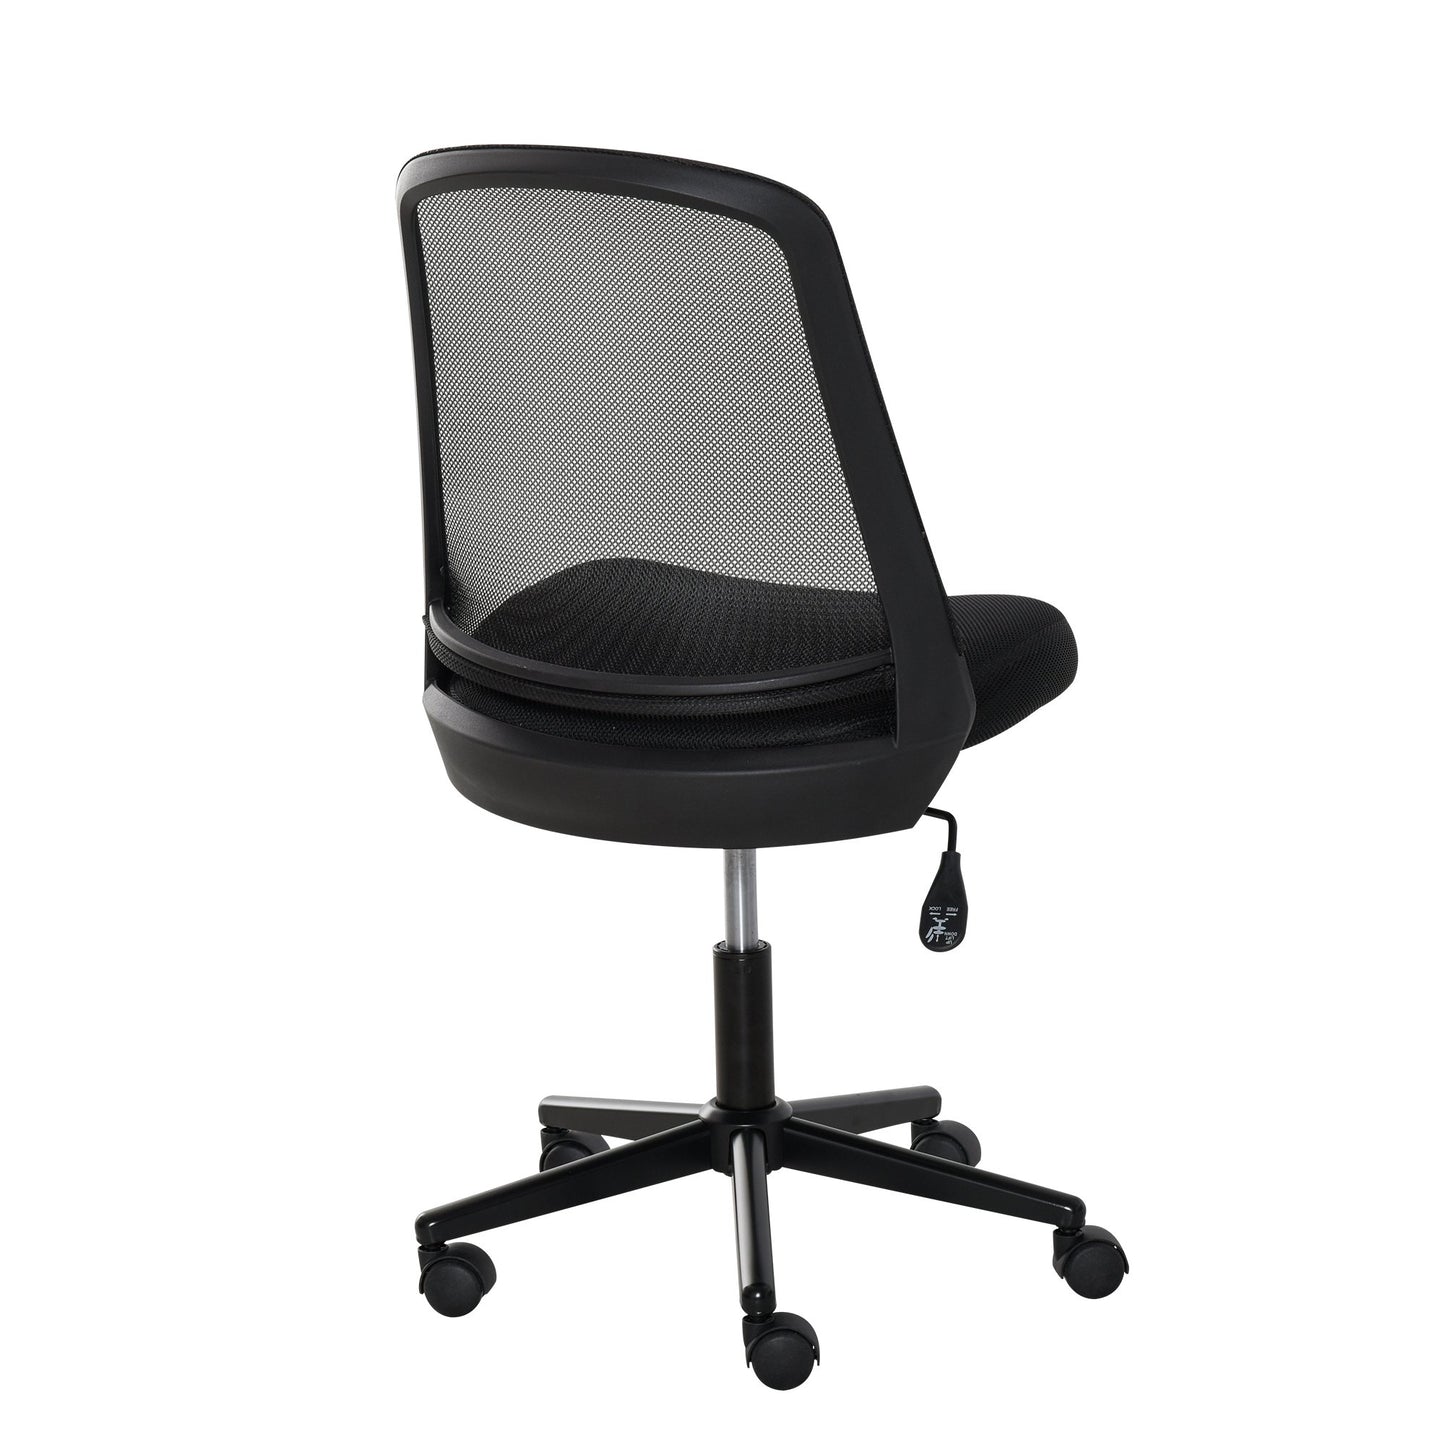 Vinsetto Leisure Office Chair Mesh Fabric Computer Home Study Armless with Wheels, Black